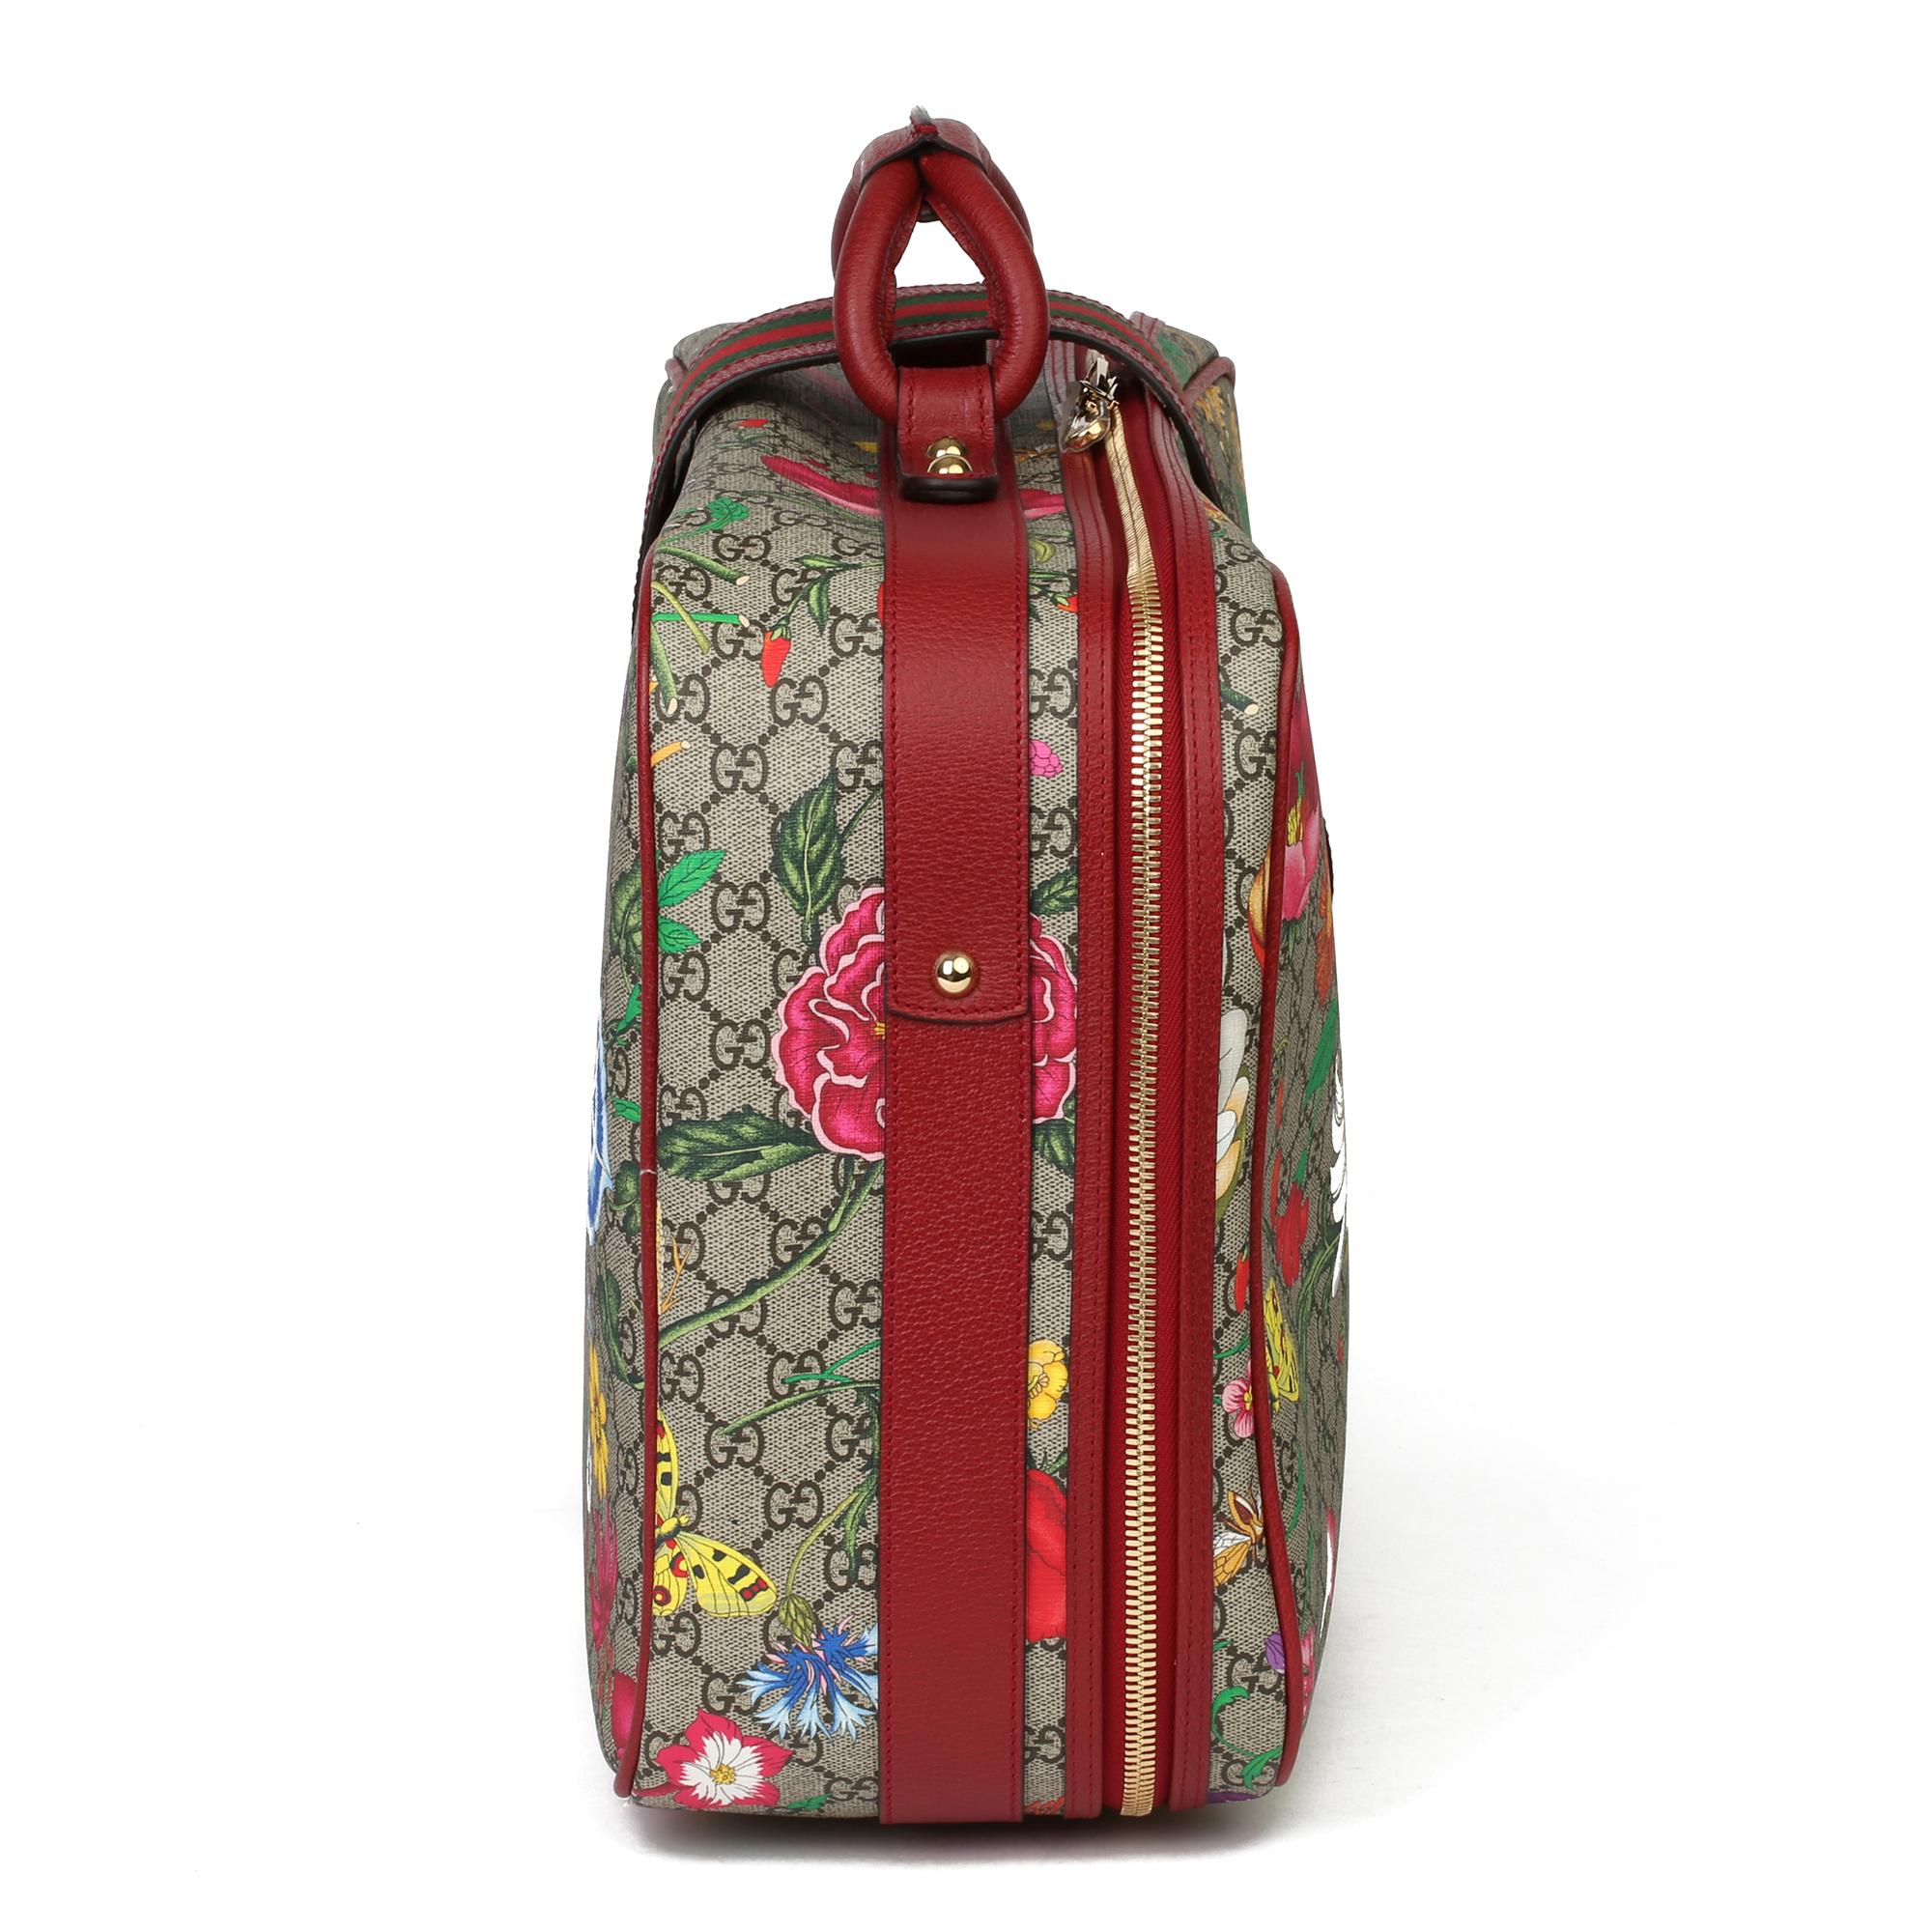 GUCCI
GG Flora Coated Canvas & Red Pigskin Leather Suitcase 

Xupes Reference: CB262
Serial Number: 424501.0011998
Age (Circa): 2021
Accompanied By: Gucci Dust Bag, Care Booklet, Padlock, Keys, Clochette, Luggage Tag
Authenticity Details: Date Stamp